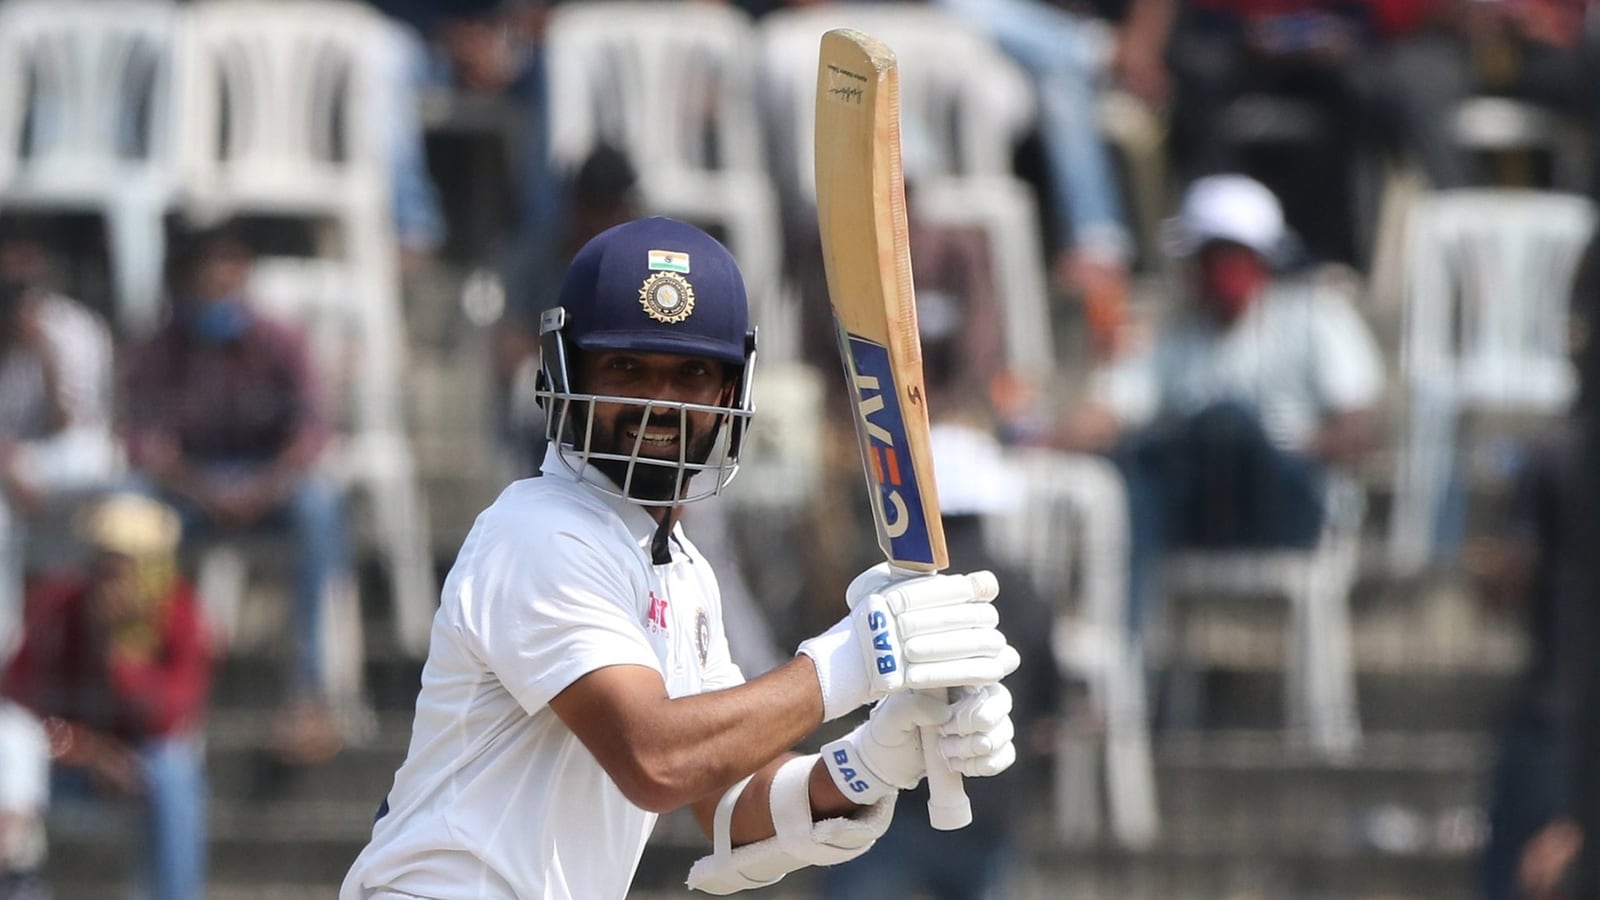 Ajinkya Rahane to lead India in first Test vs New Zealand, rested Virat Kohli to be back from second Test; Vihari droppe | Cricket - Hindustan Times